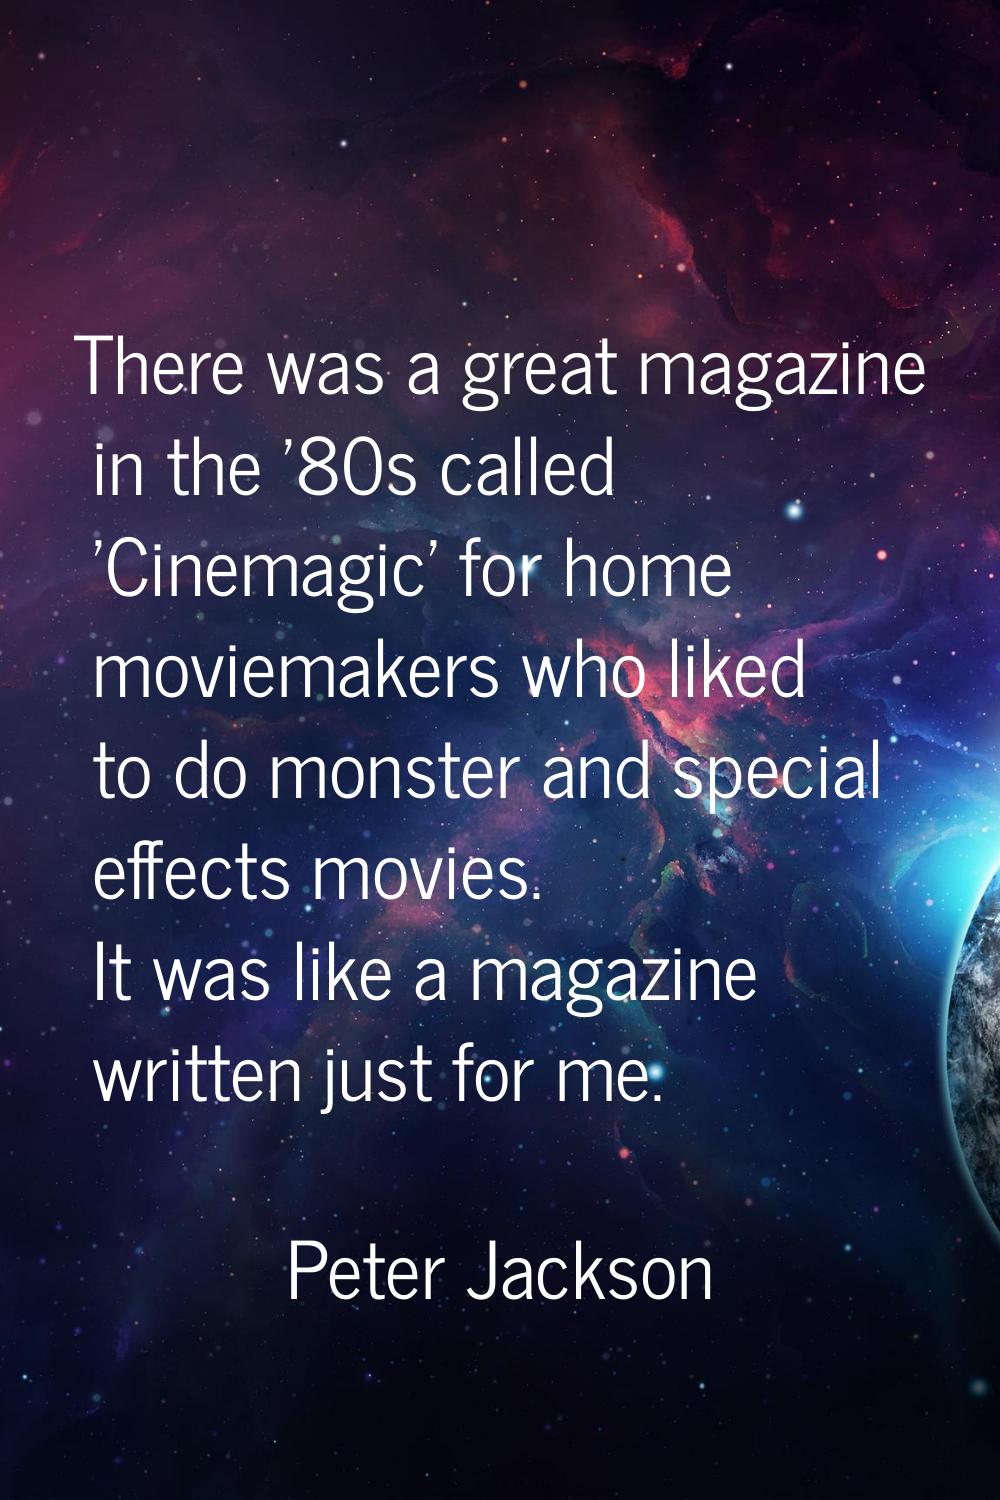 There was a great magazine in the '80s called 'Cinemagic' for home moviemakers who liked to do mons